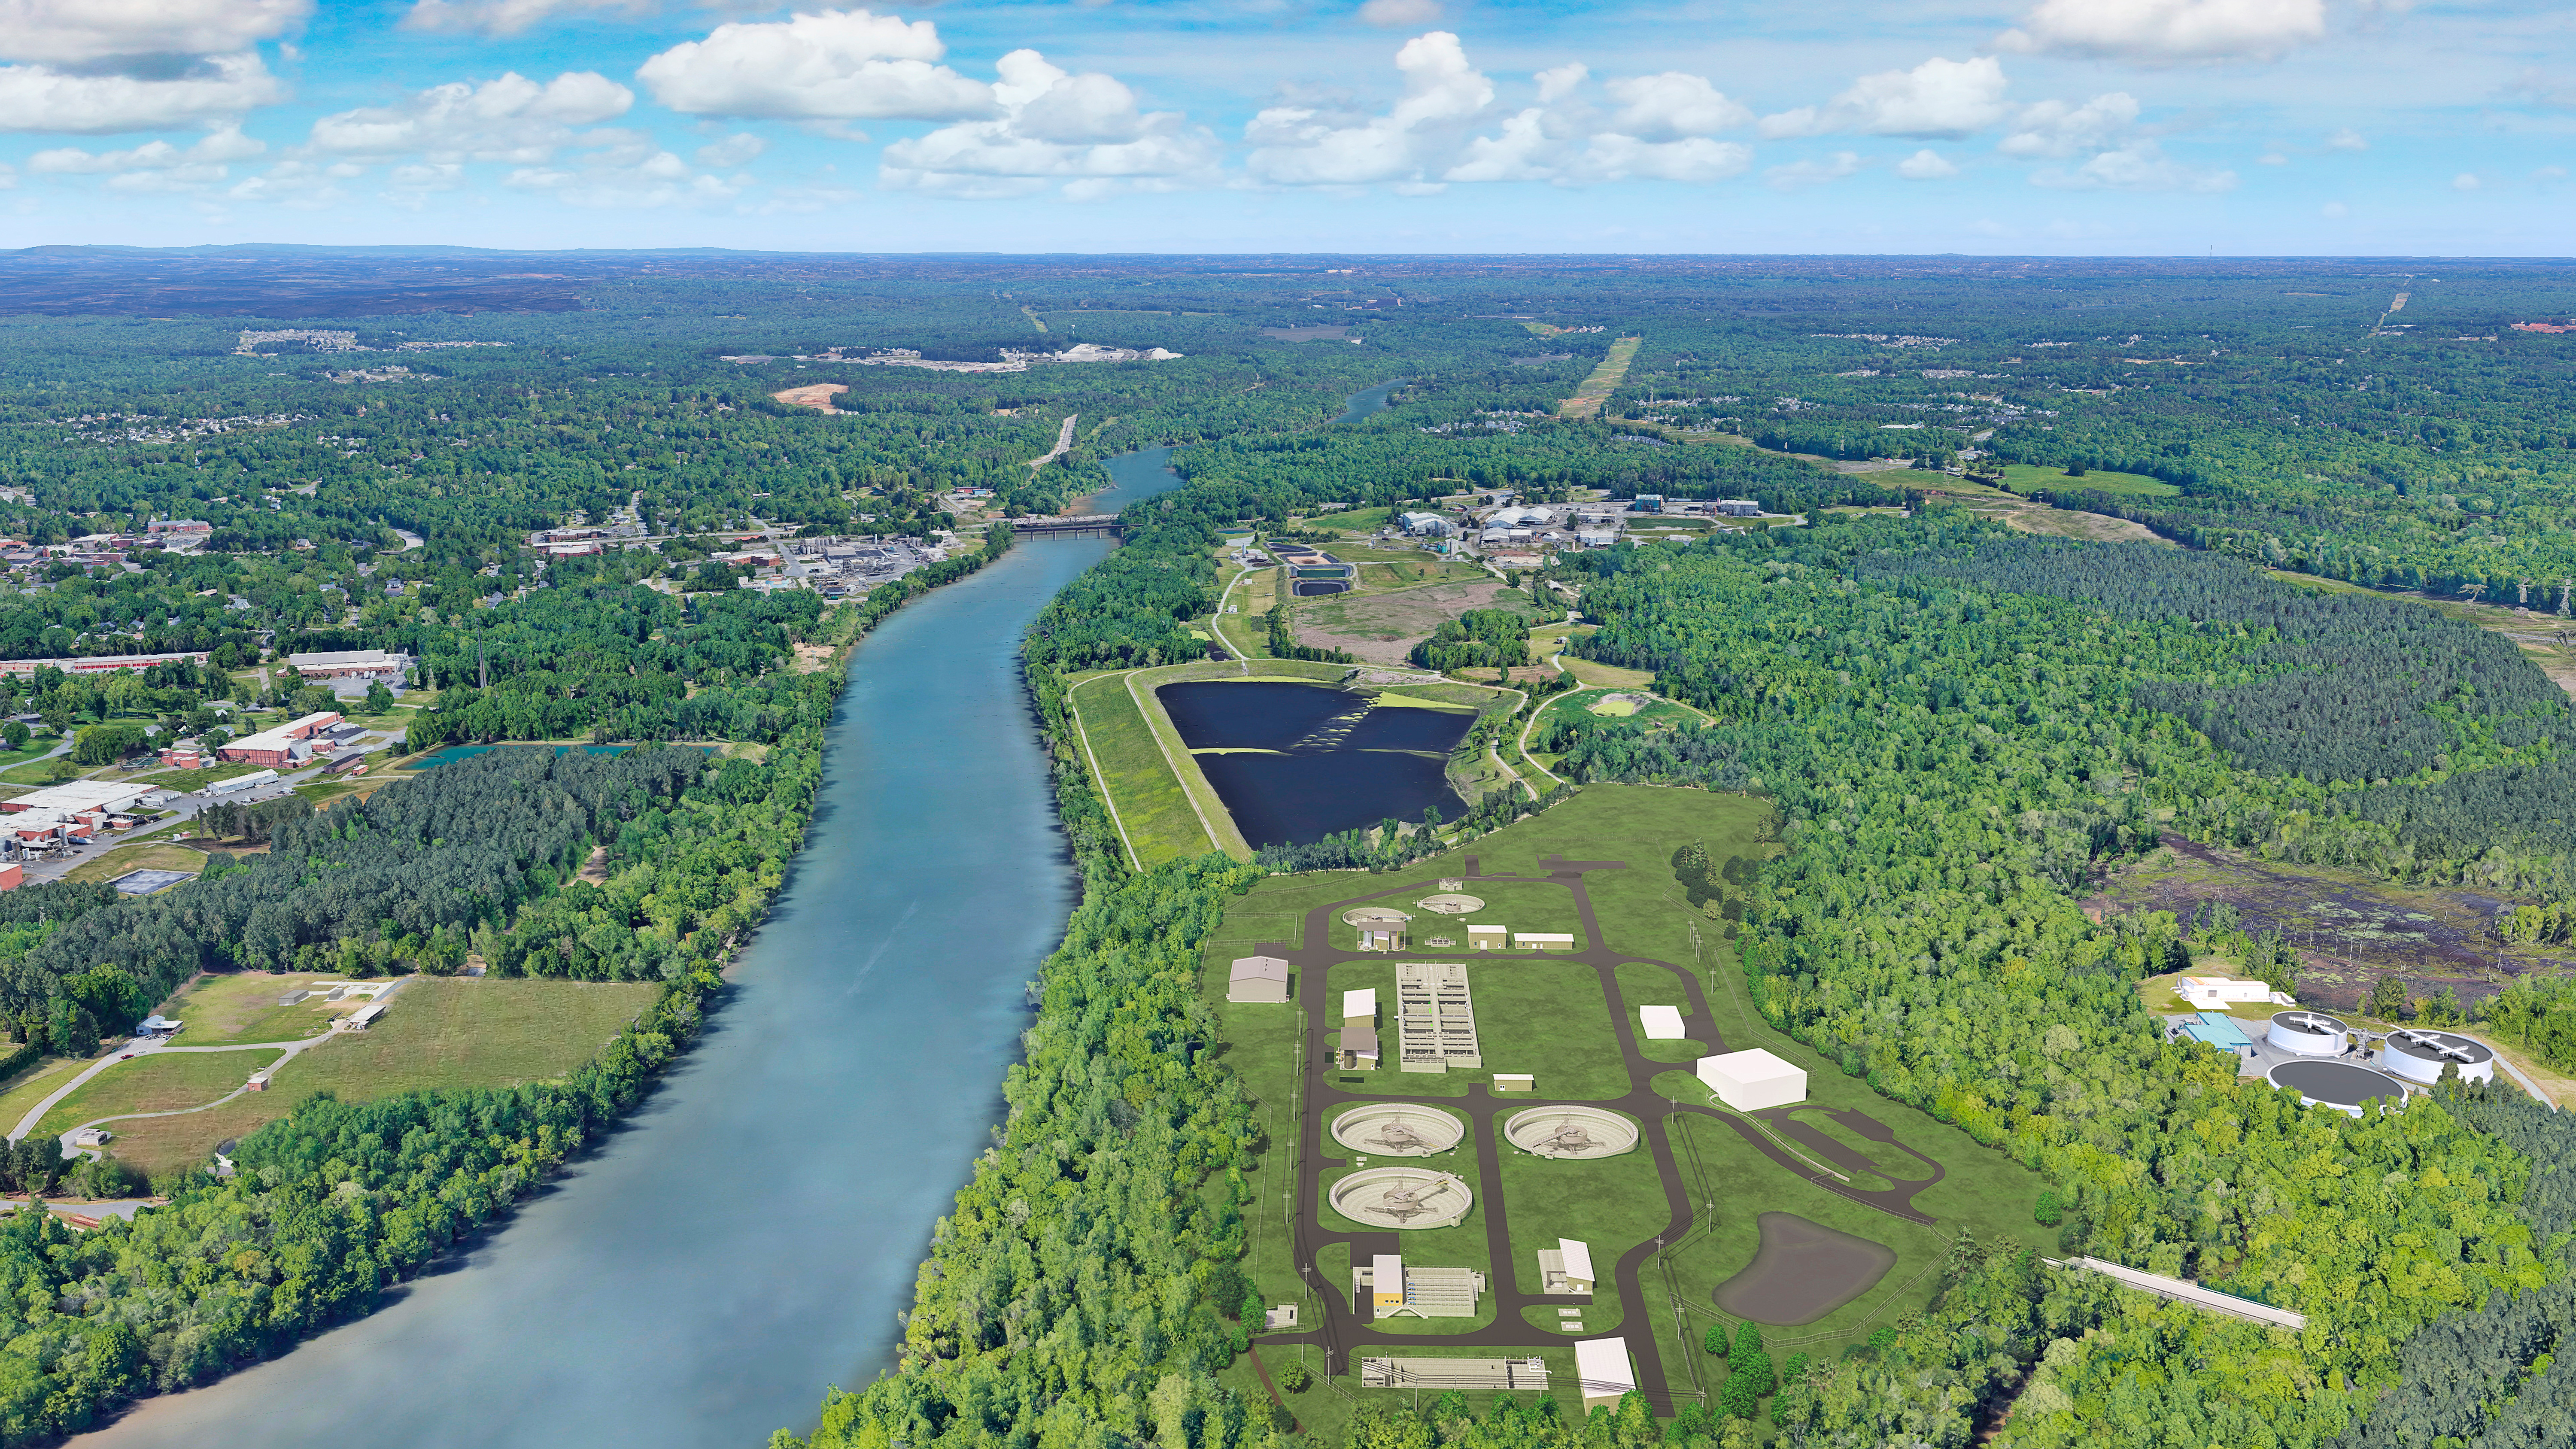 An aerial visual simulation of the future Stowe Facility.